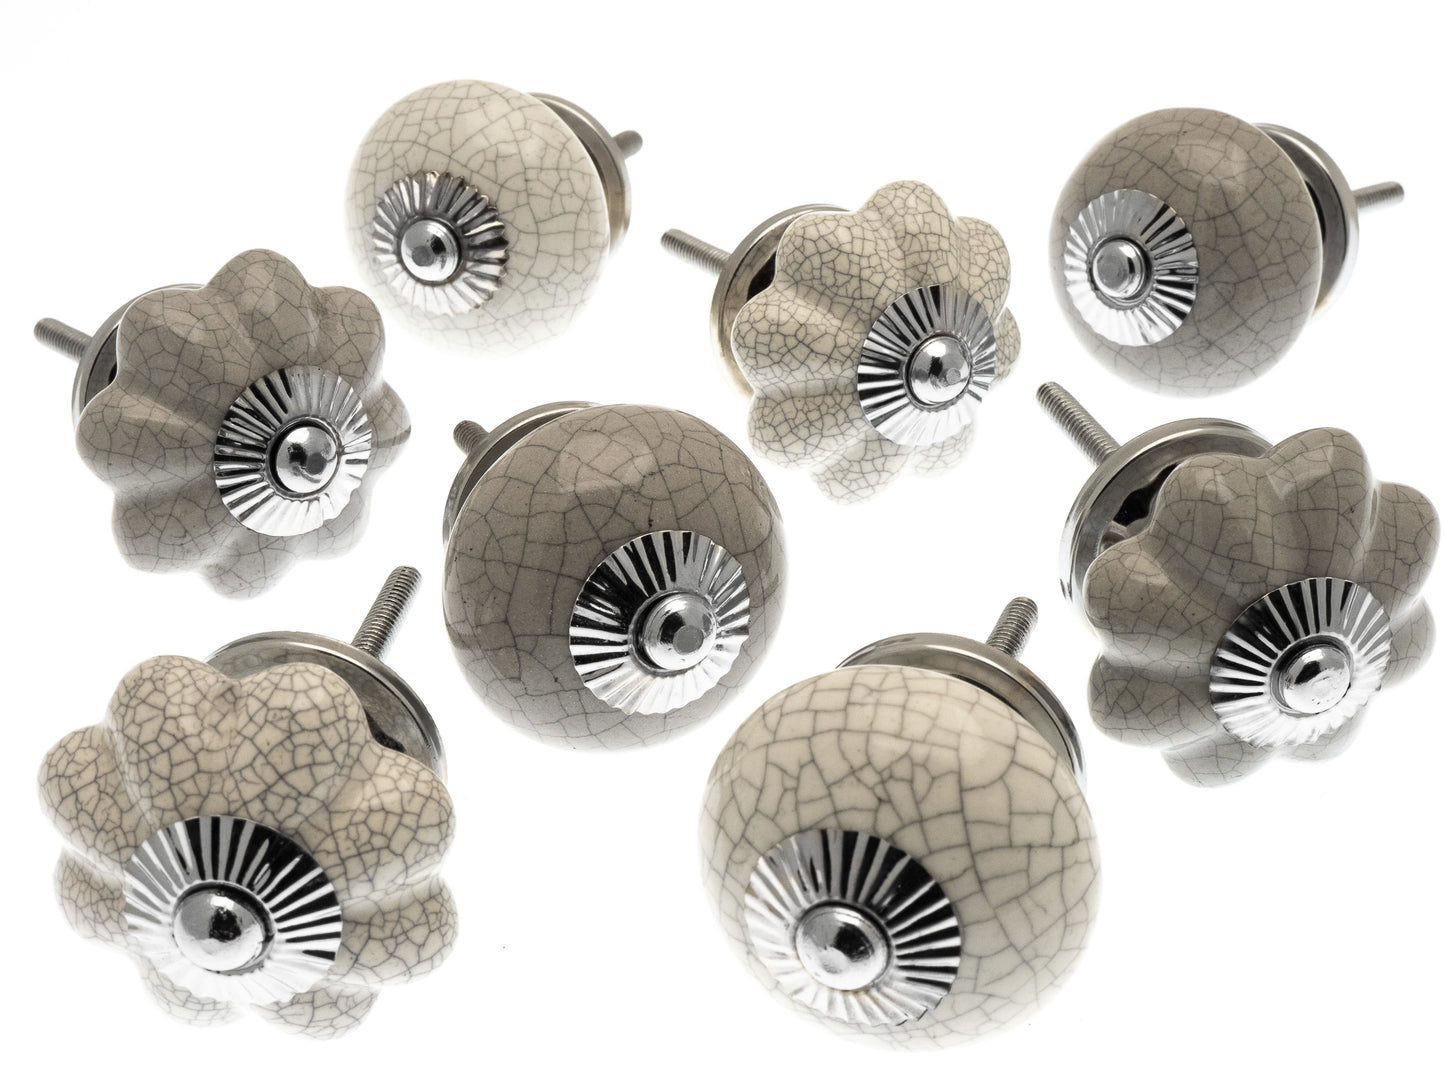 Crackle Effect Grey and White Ceramic Cupboard Drawer Knob Pulls (Set of 8)